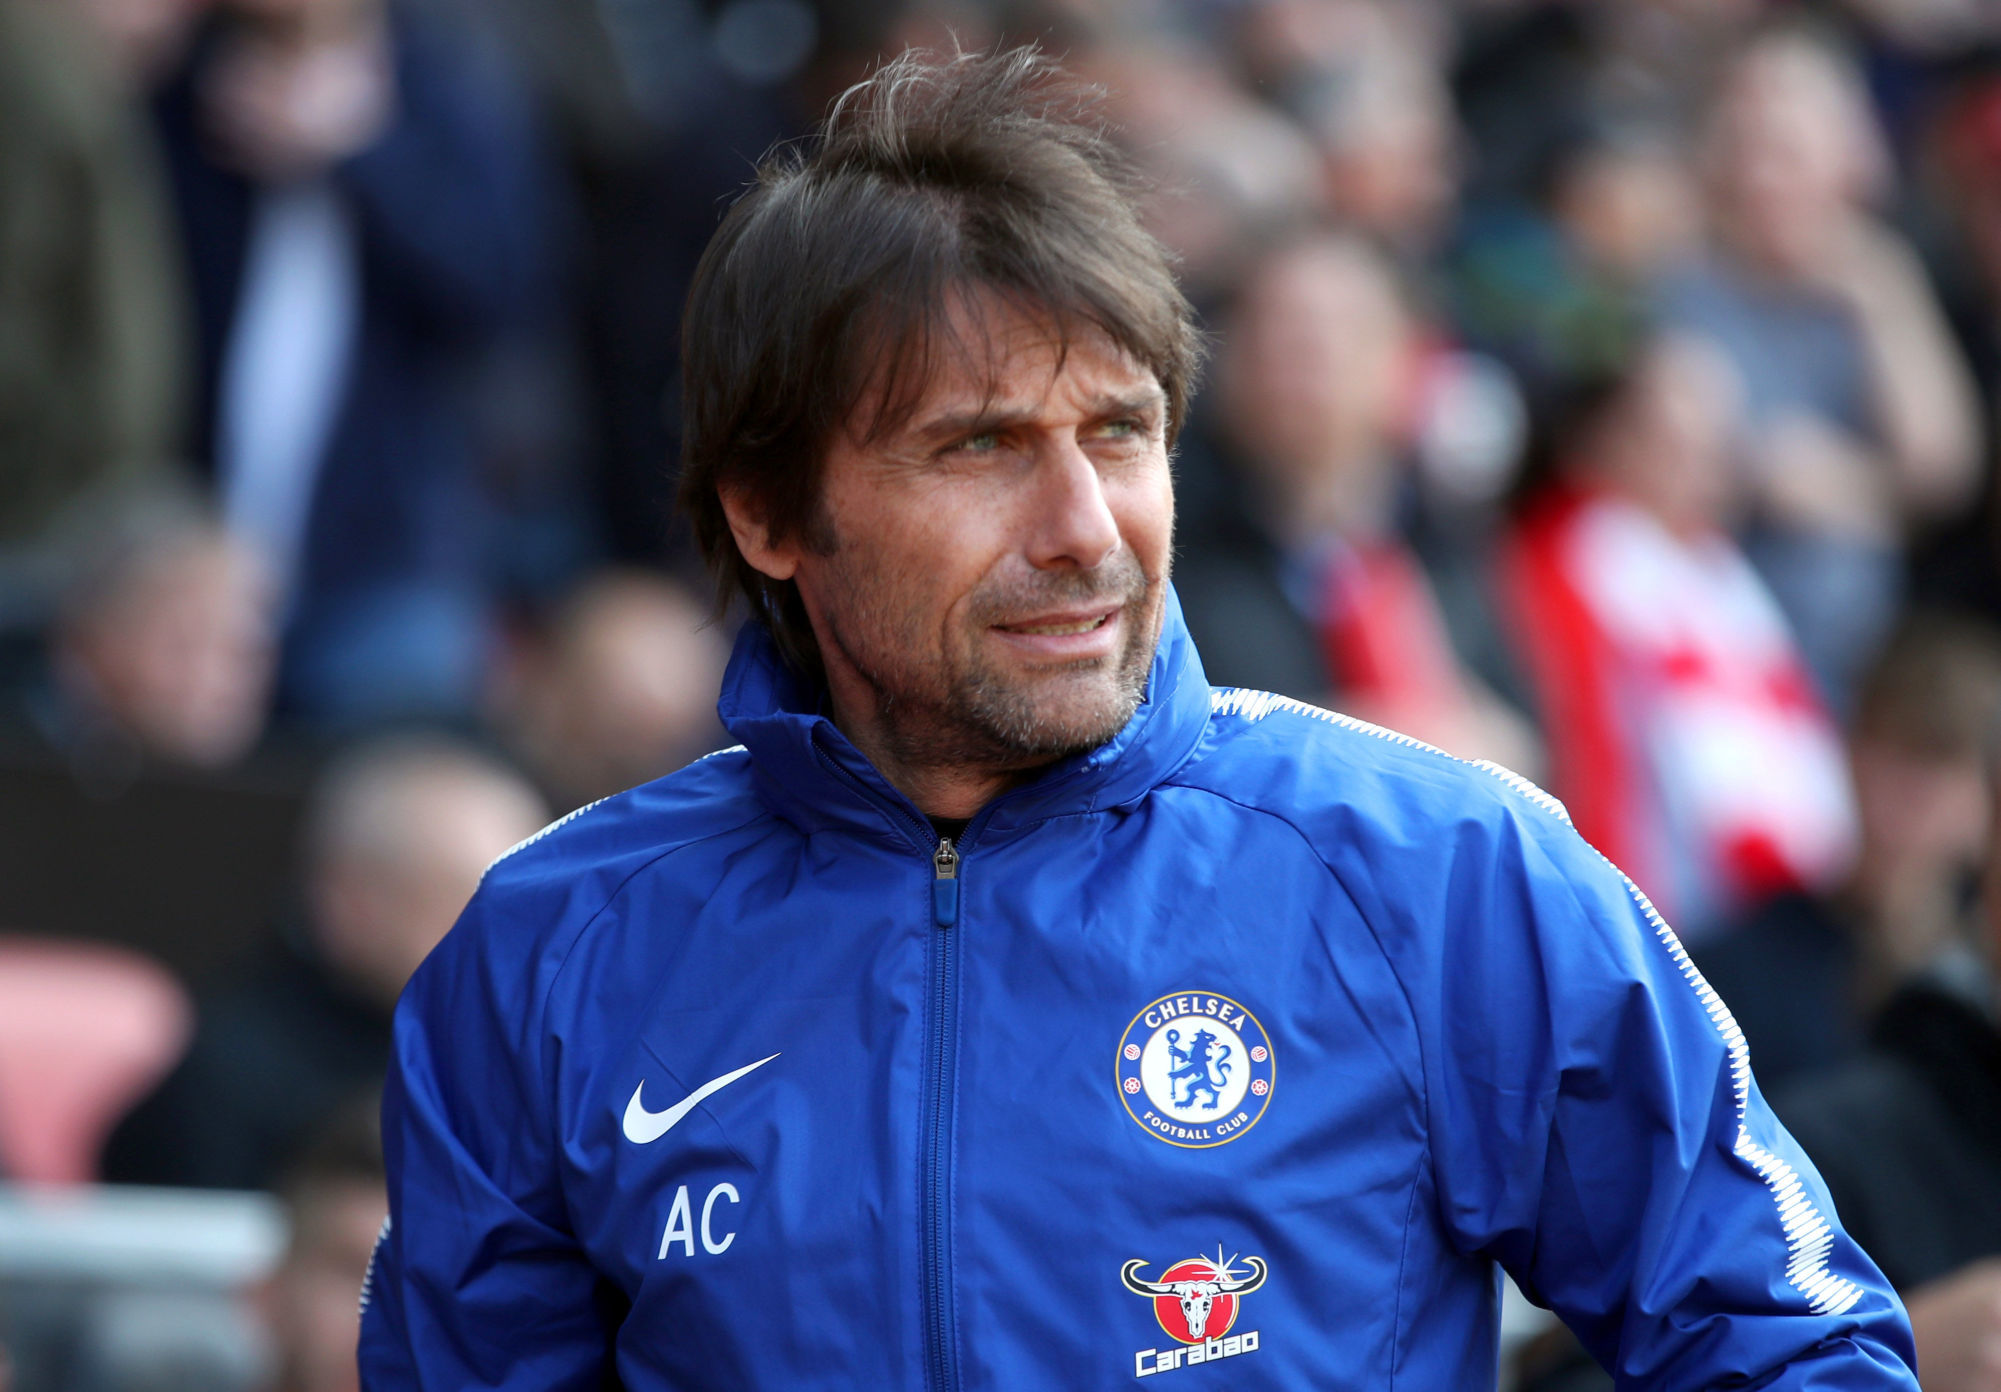 Chelsea manager Antonio Conte during the Premier League match between Southampton and CHelsea at St Mary's Stadium, Southampton on April 14th 2018
Photo : PA Images / Icon Sport